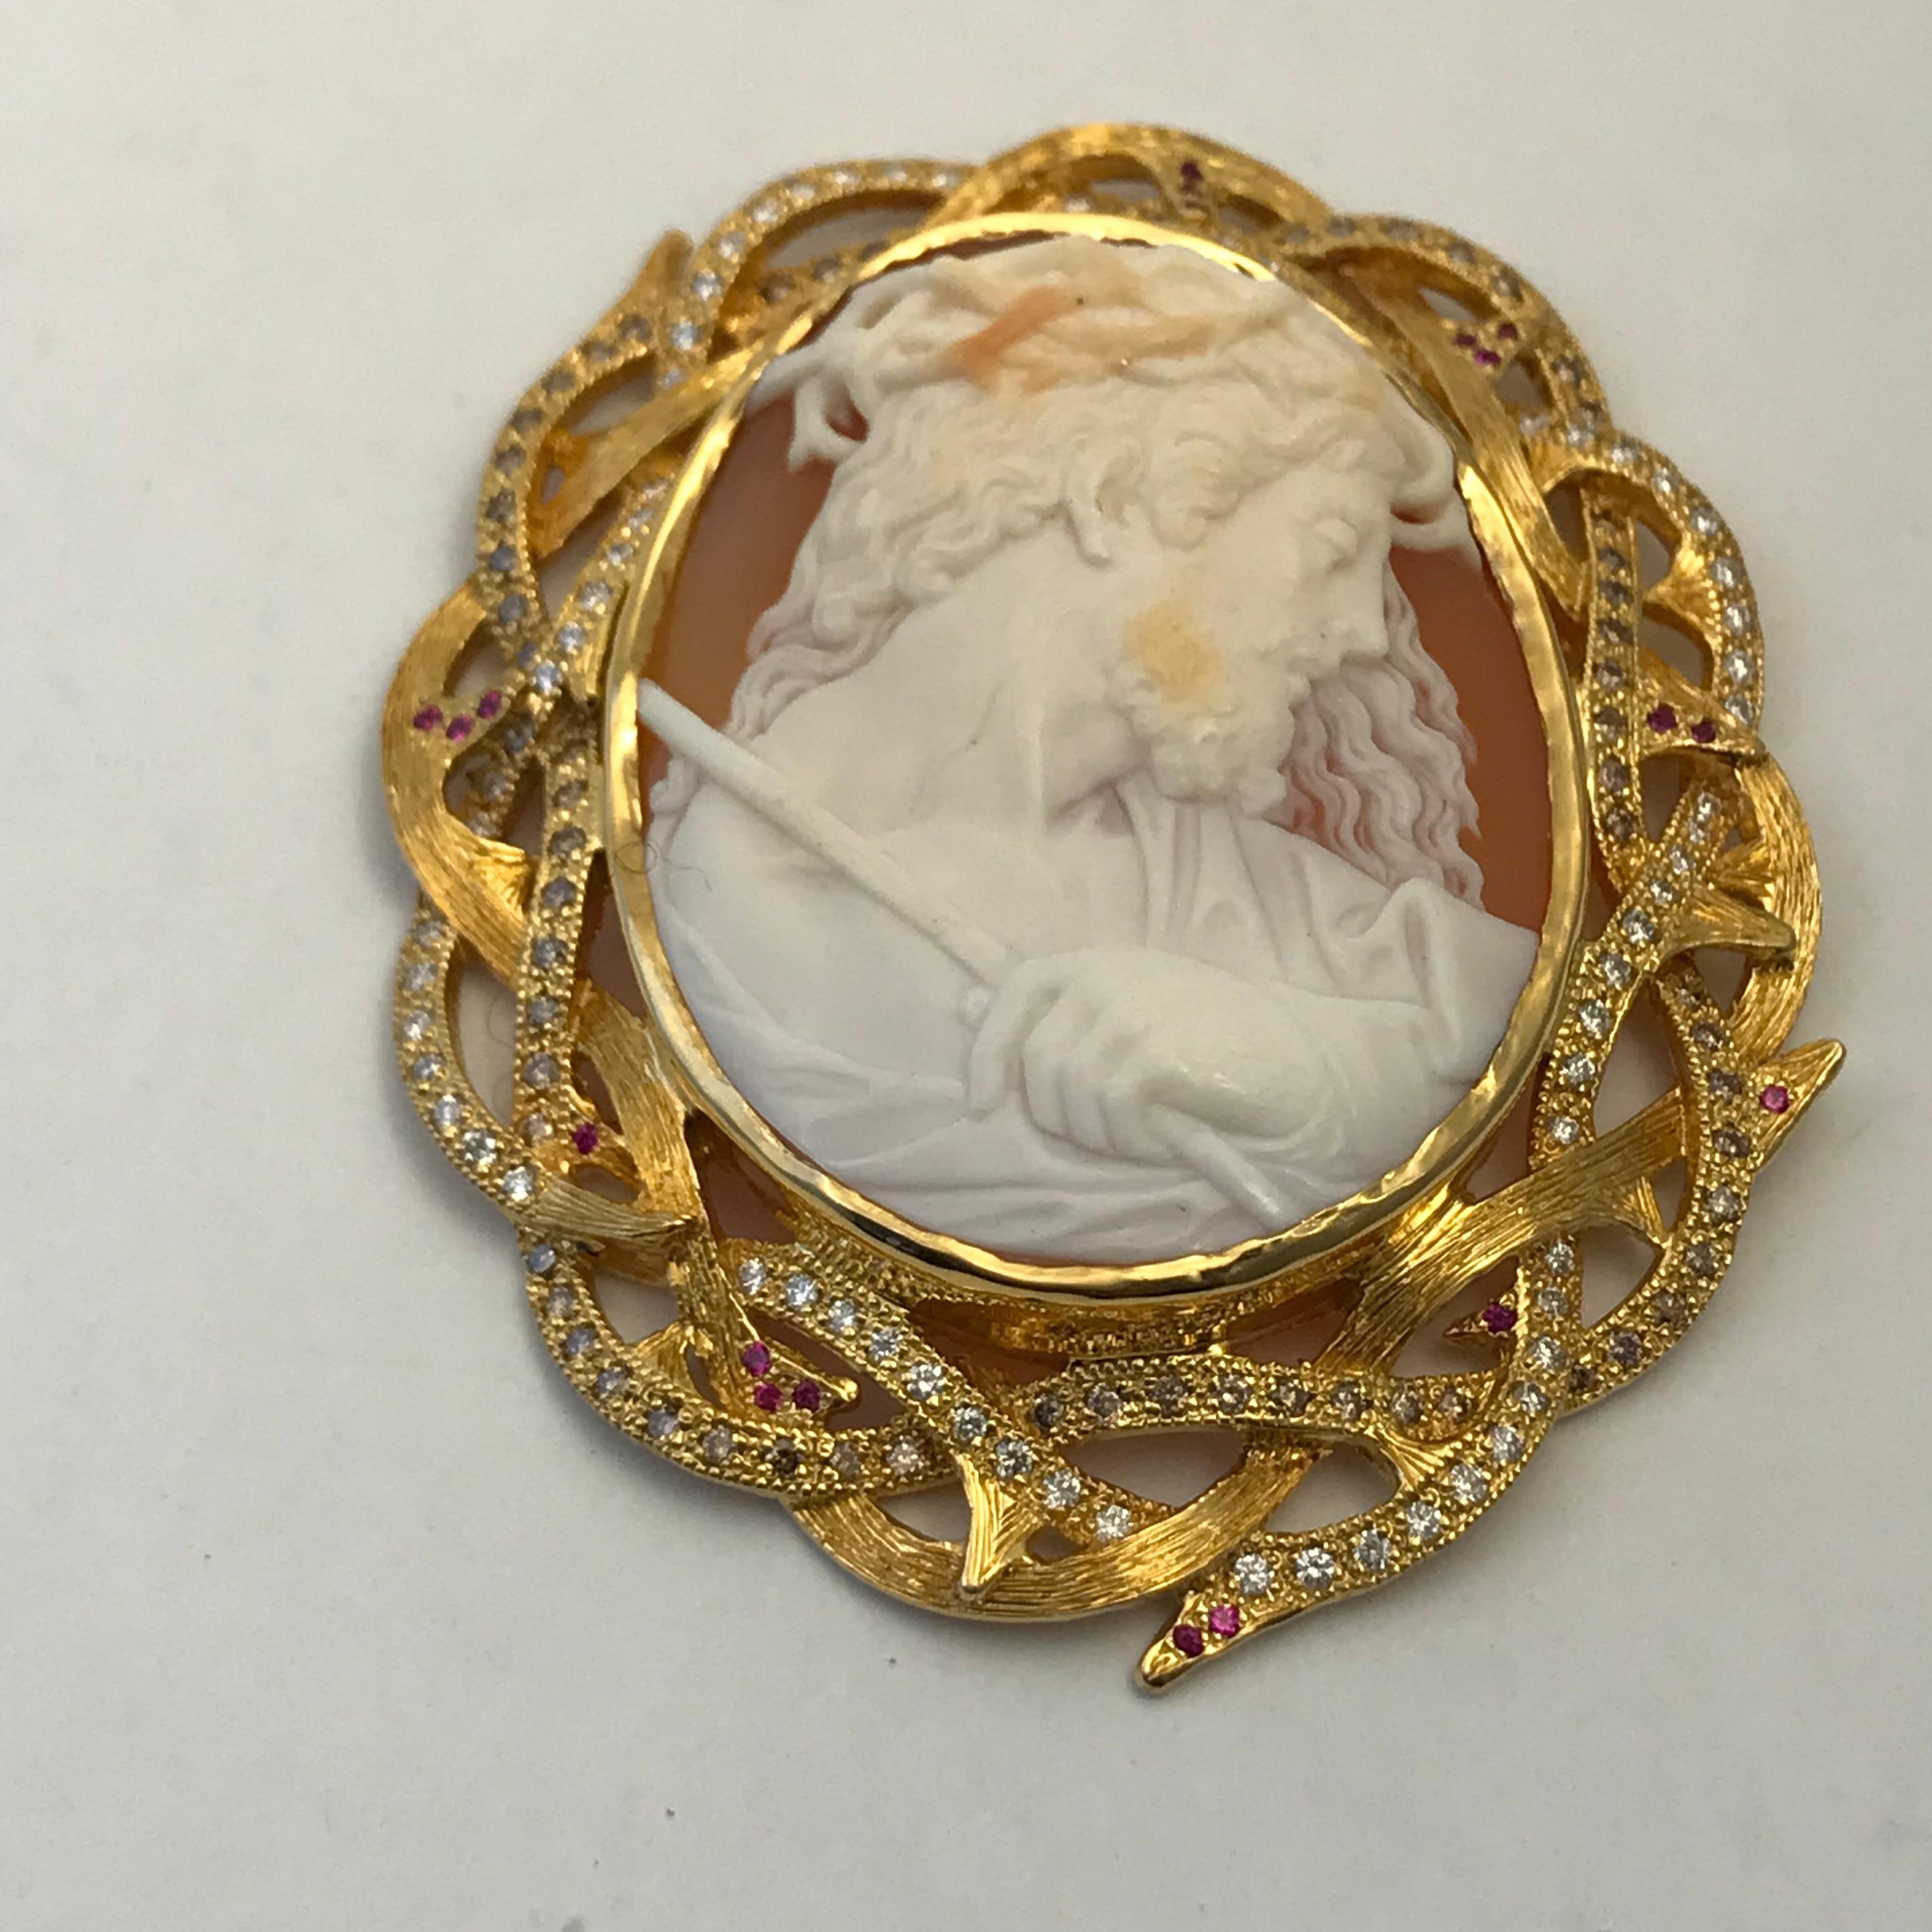 Women's or Men's Cameo 1890s Jesus Set in 14 Karat Gold with Diamonds, Rubies and Brown Diamonds For Sale